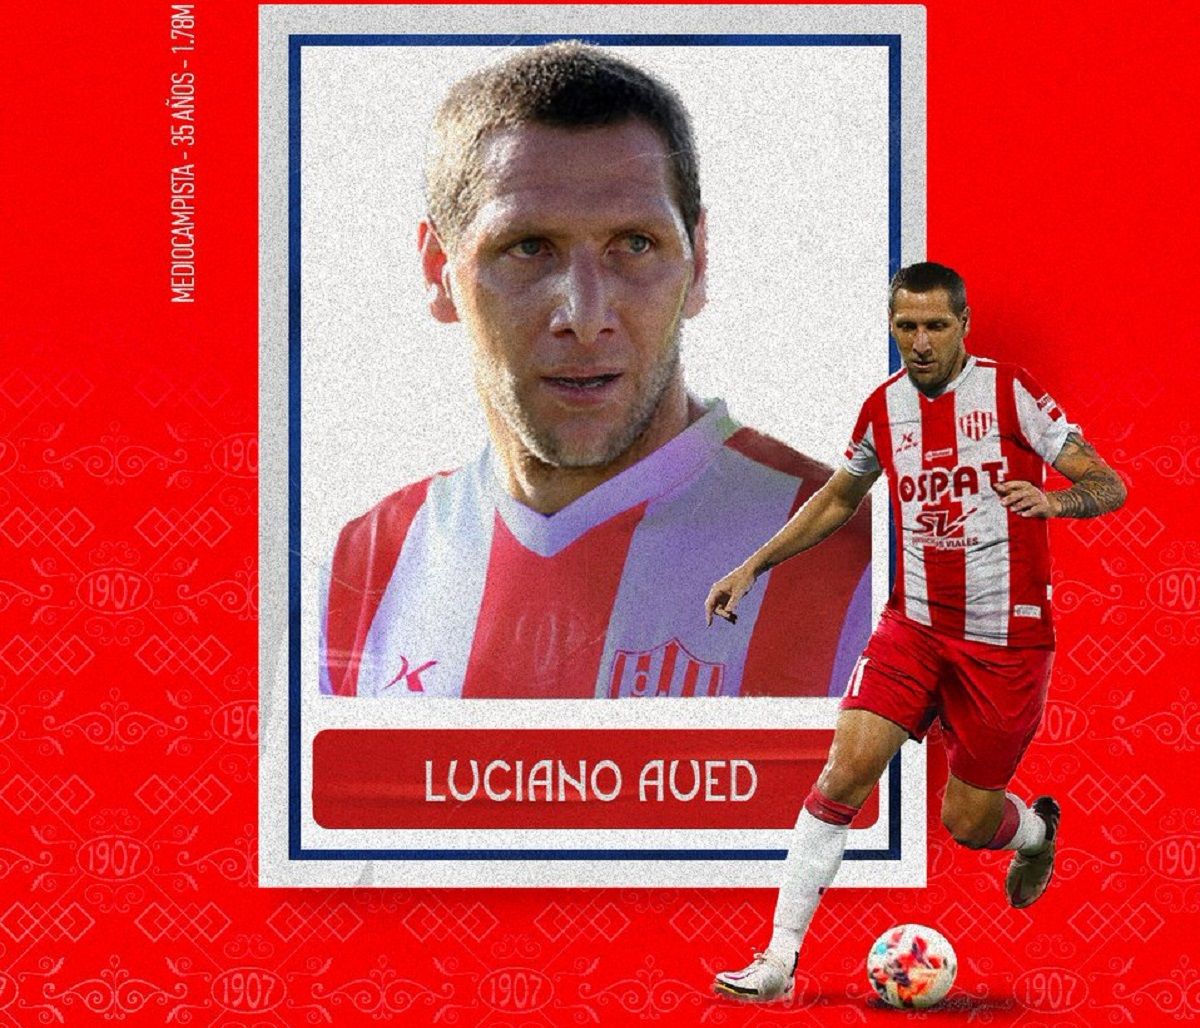 Luciano Aued